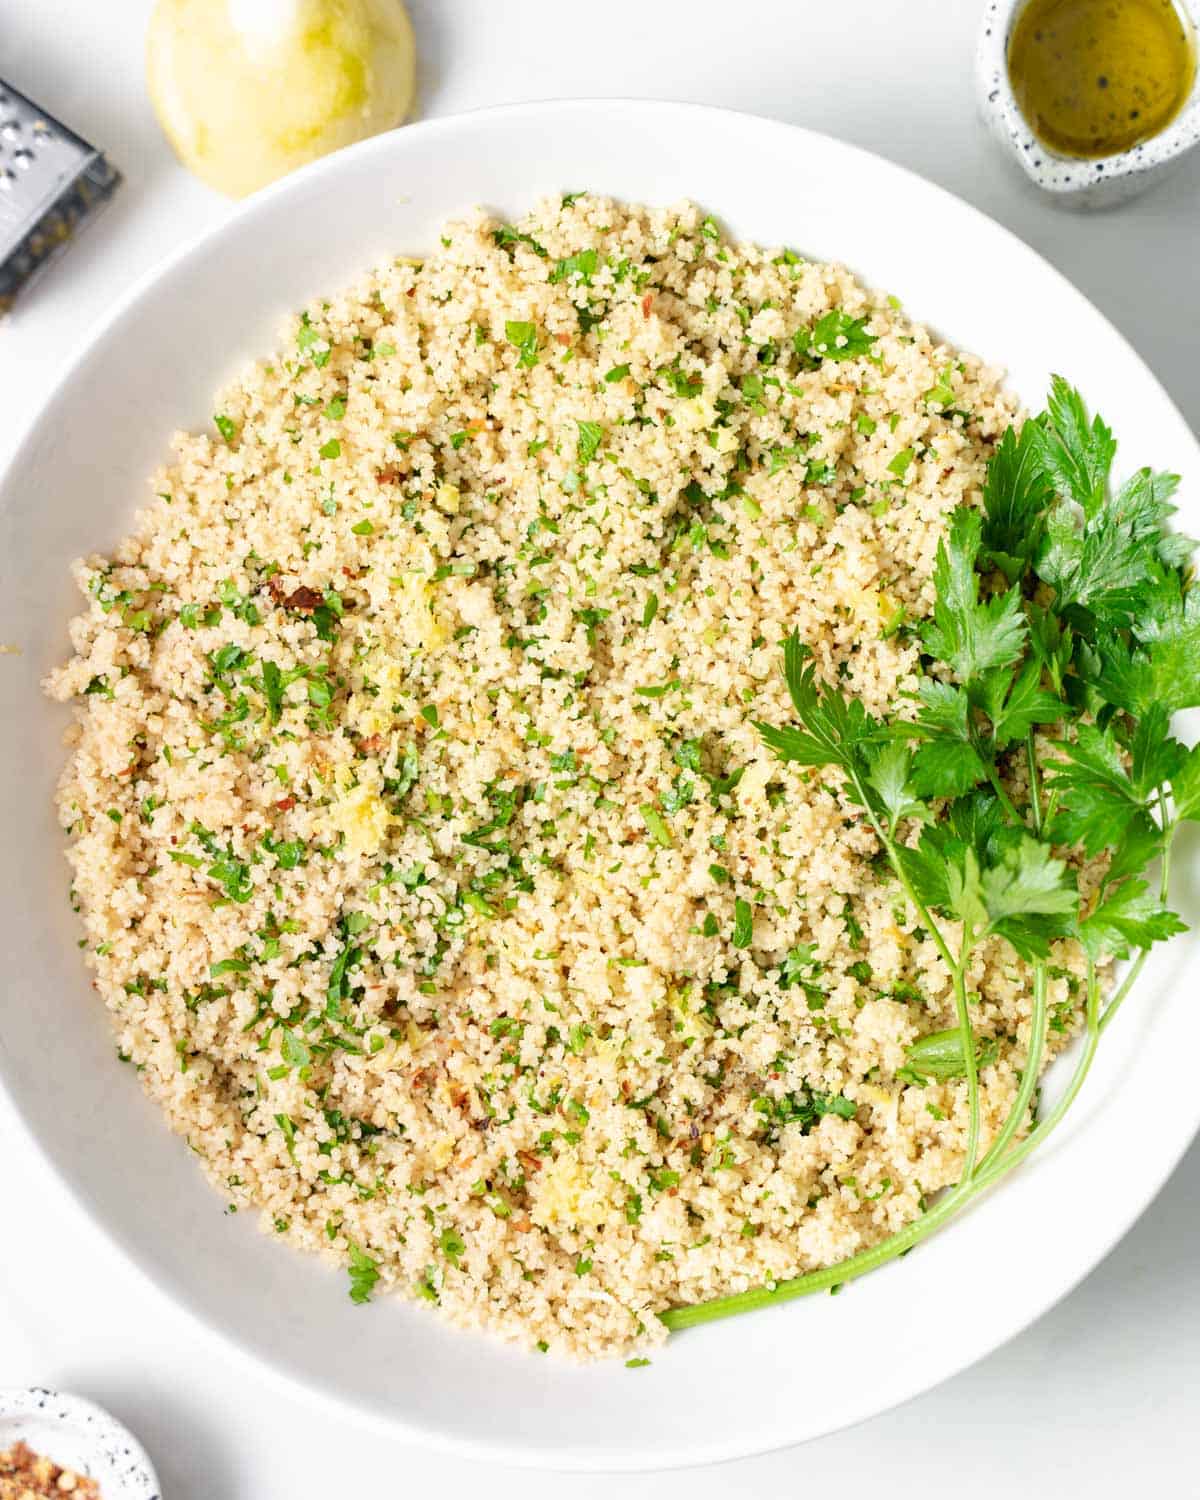 Couscous served in a white bowl garnished with fresh parsley.